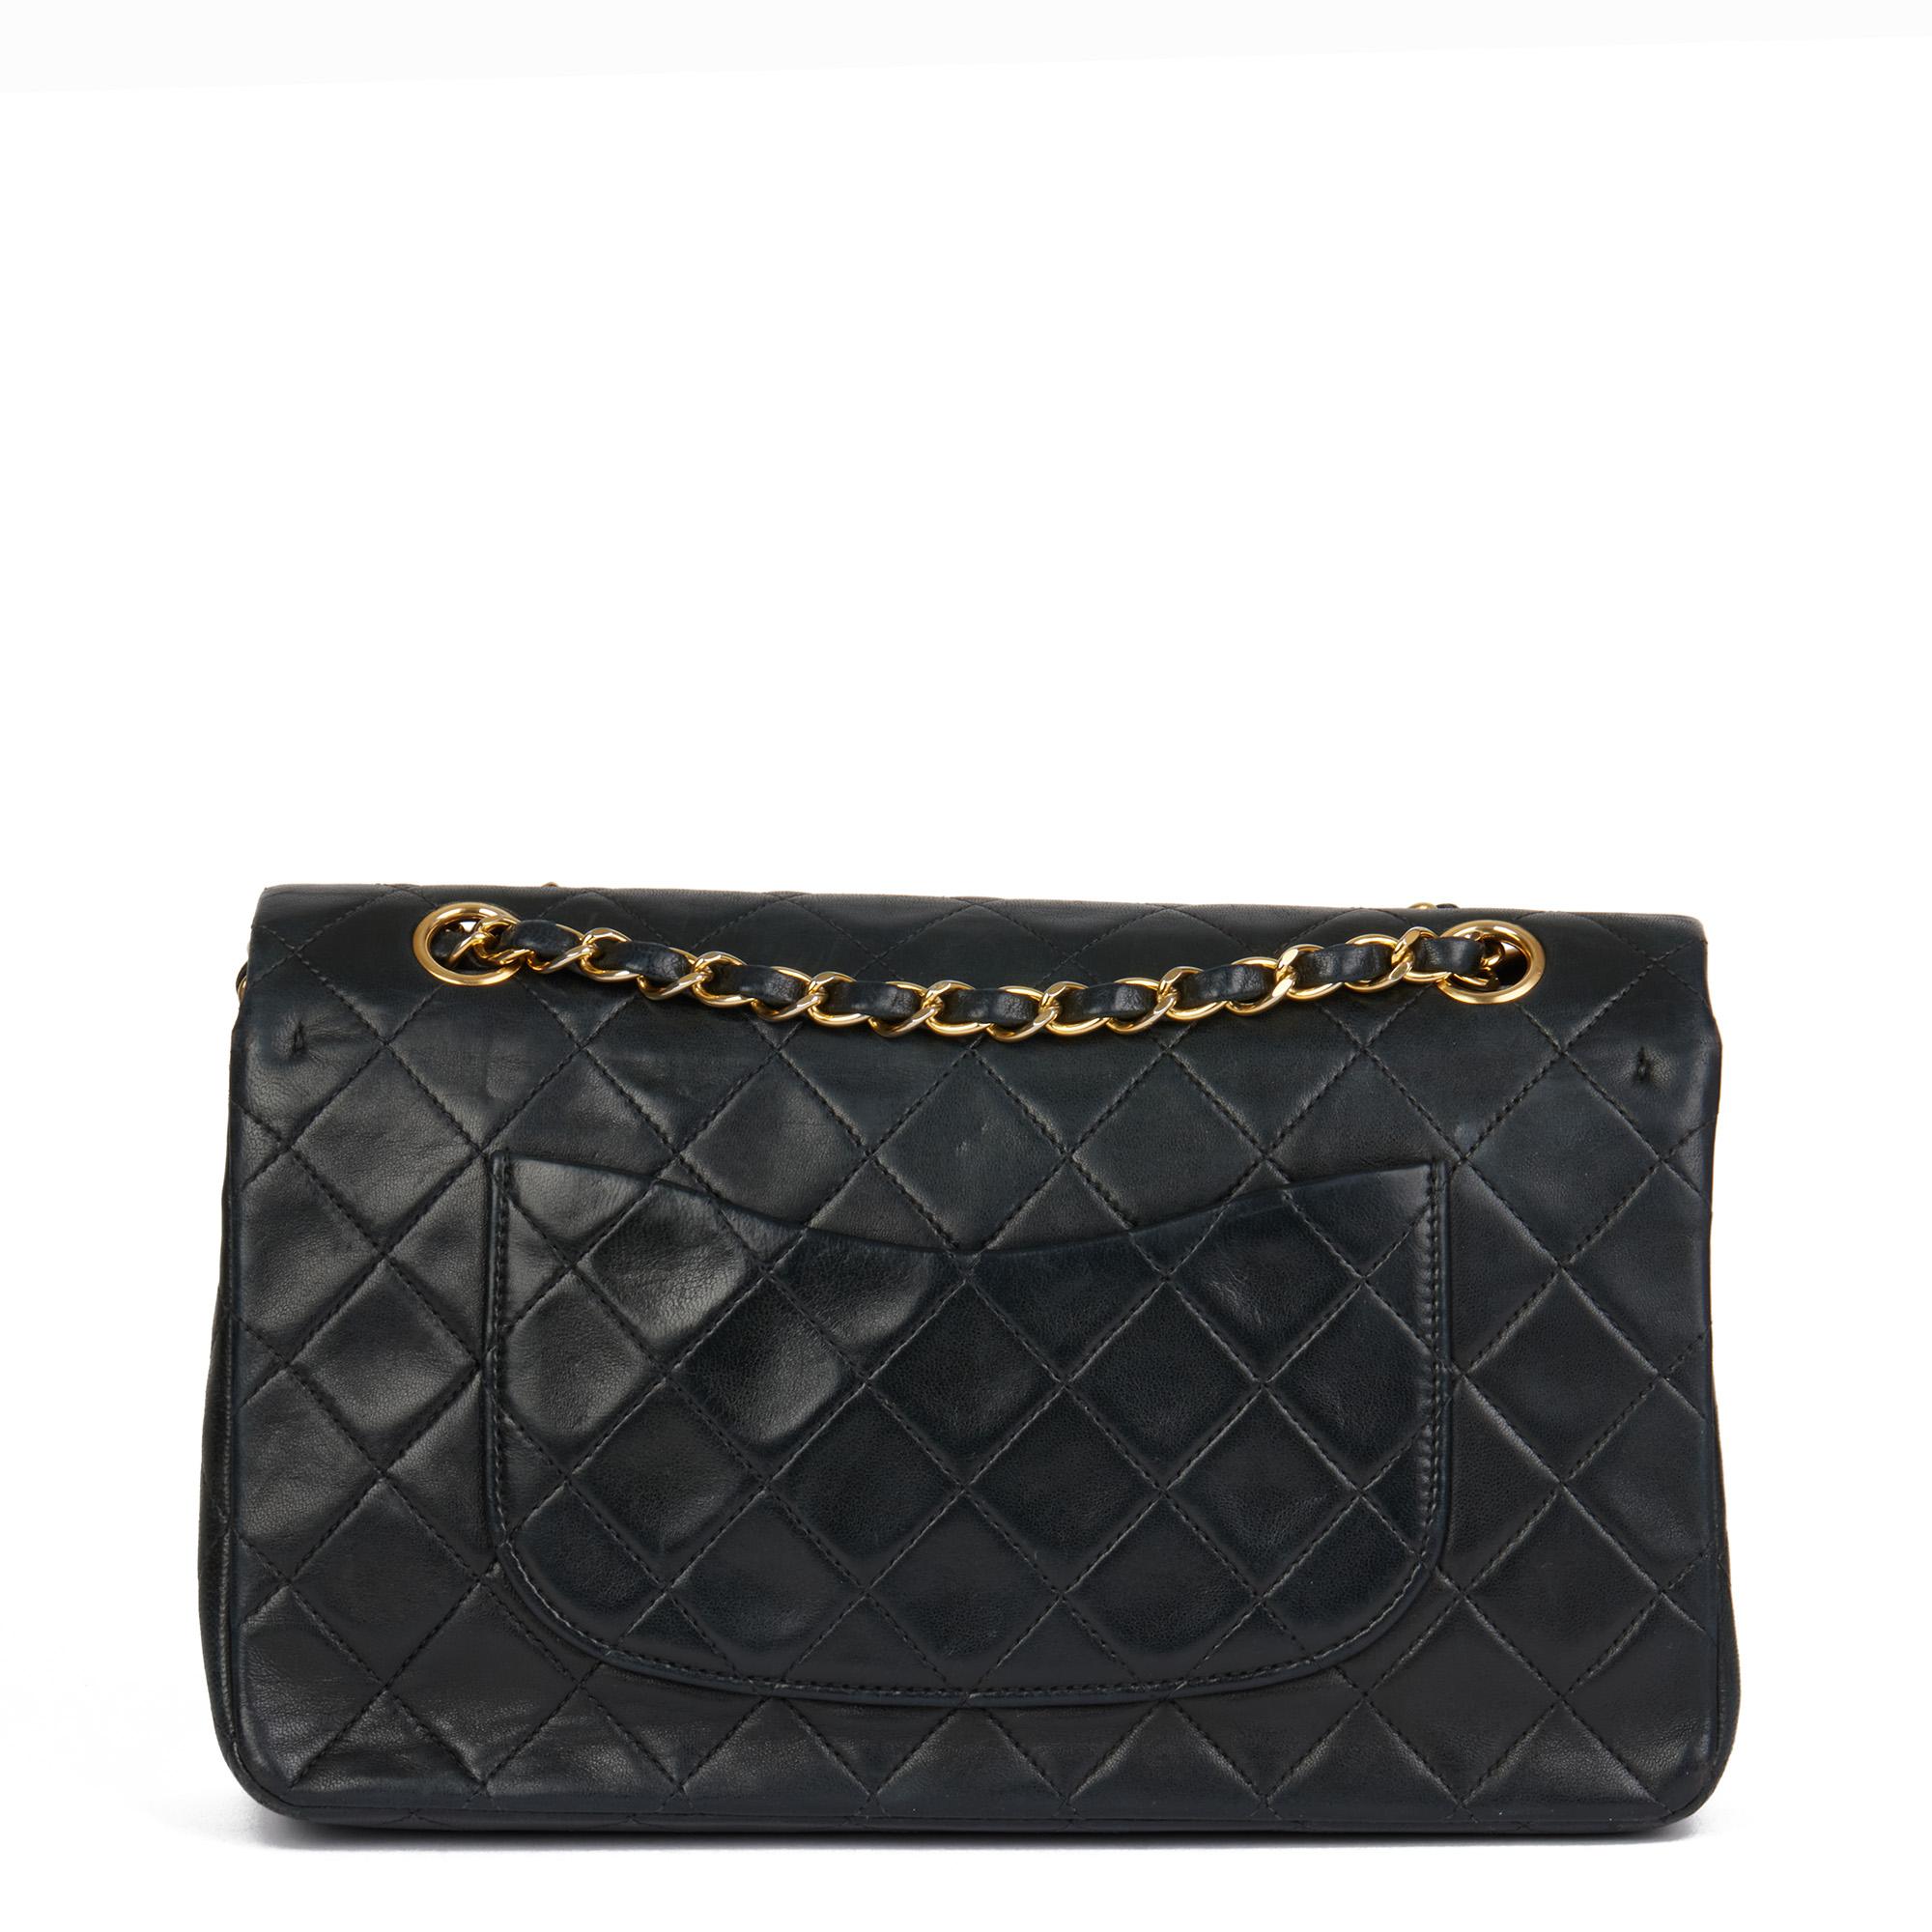 CHANEL Black Quilted Lambskin Vintage Medium Classic Double Flap Bag 1